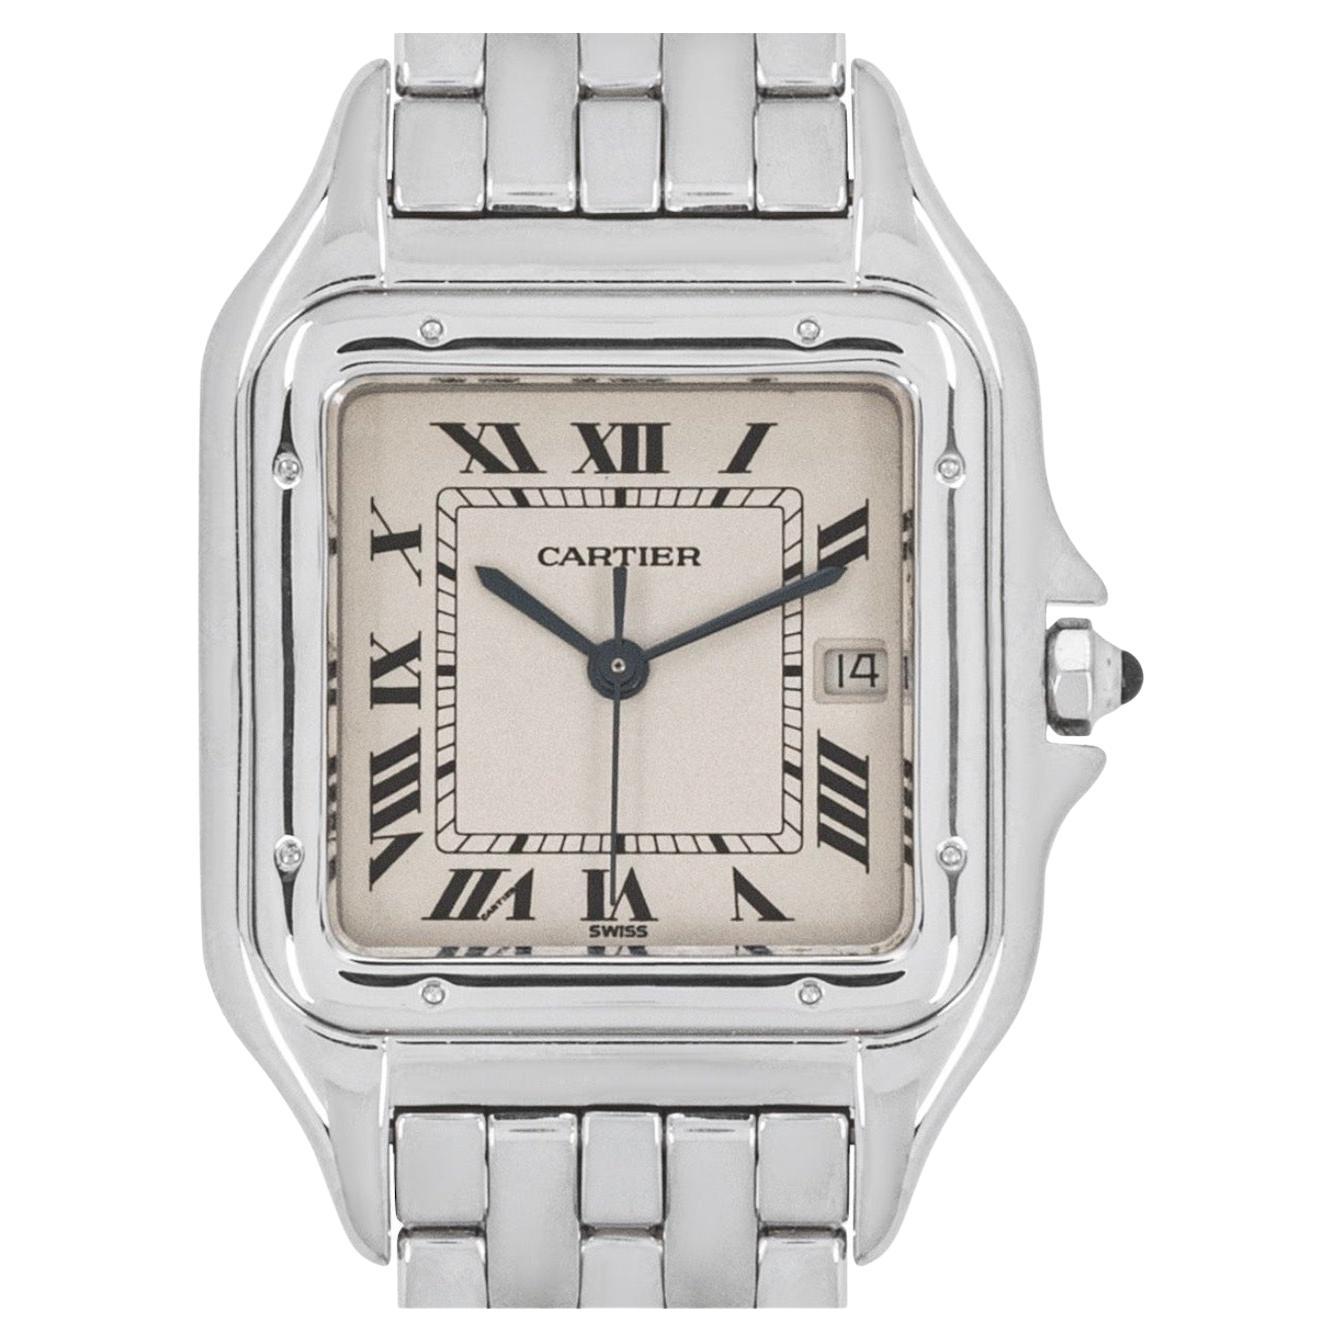 An 18k white gold Panthere wristwatch. Featuring a silver dial with roman numerals and a secret signature at 